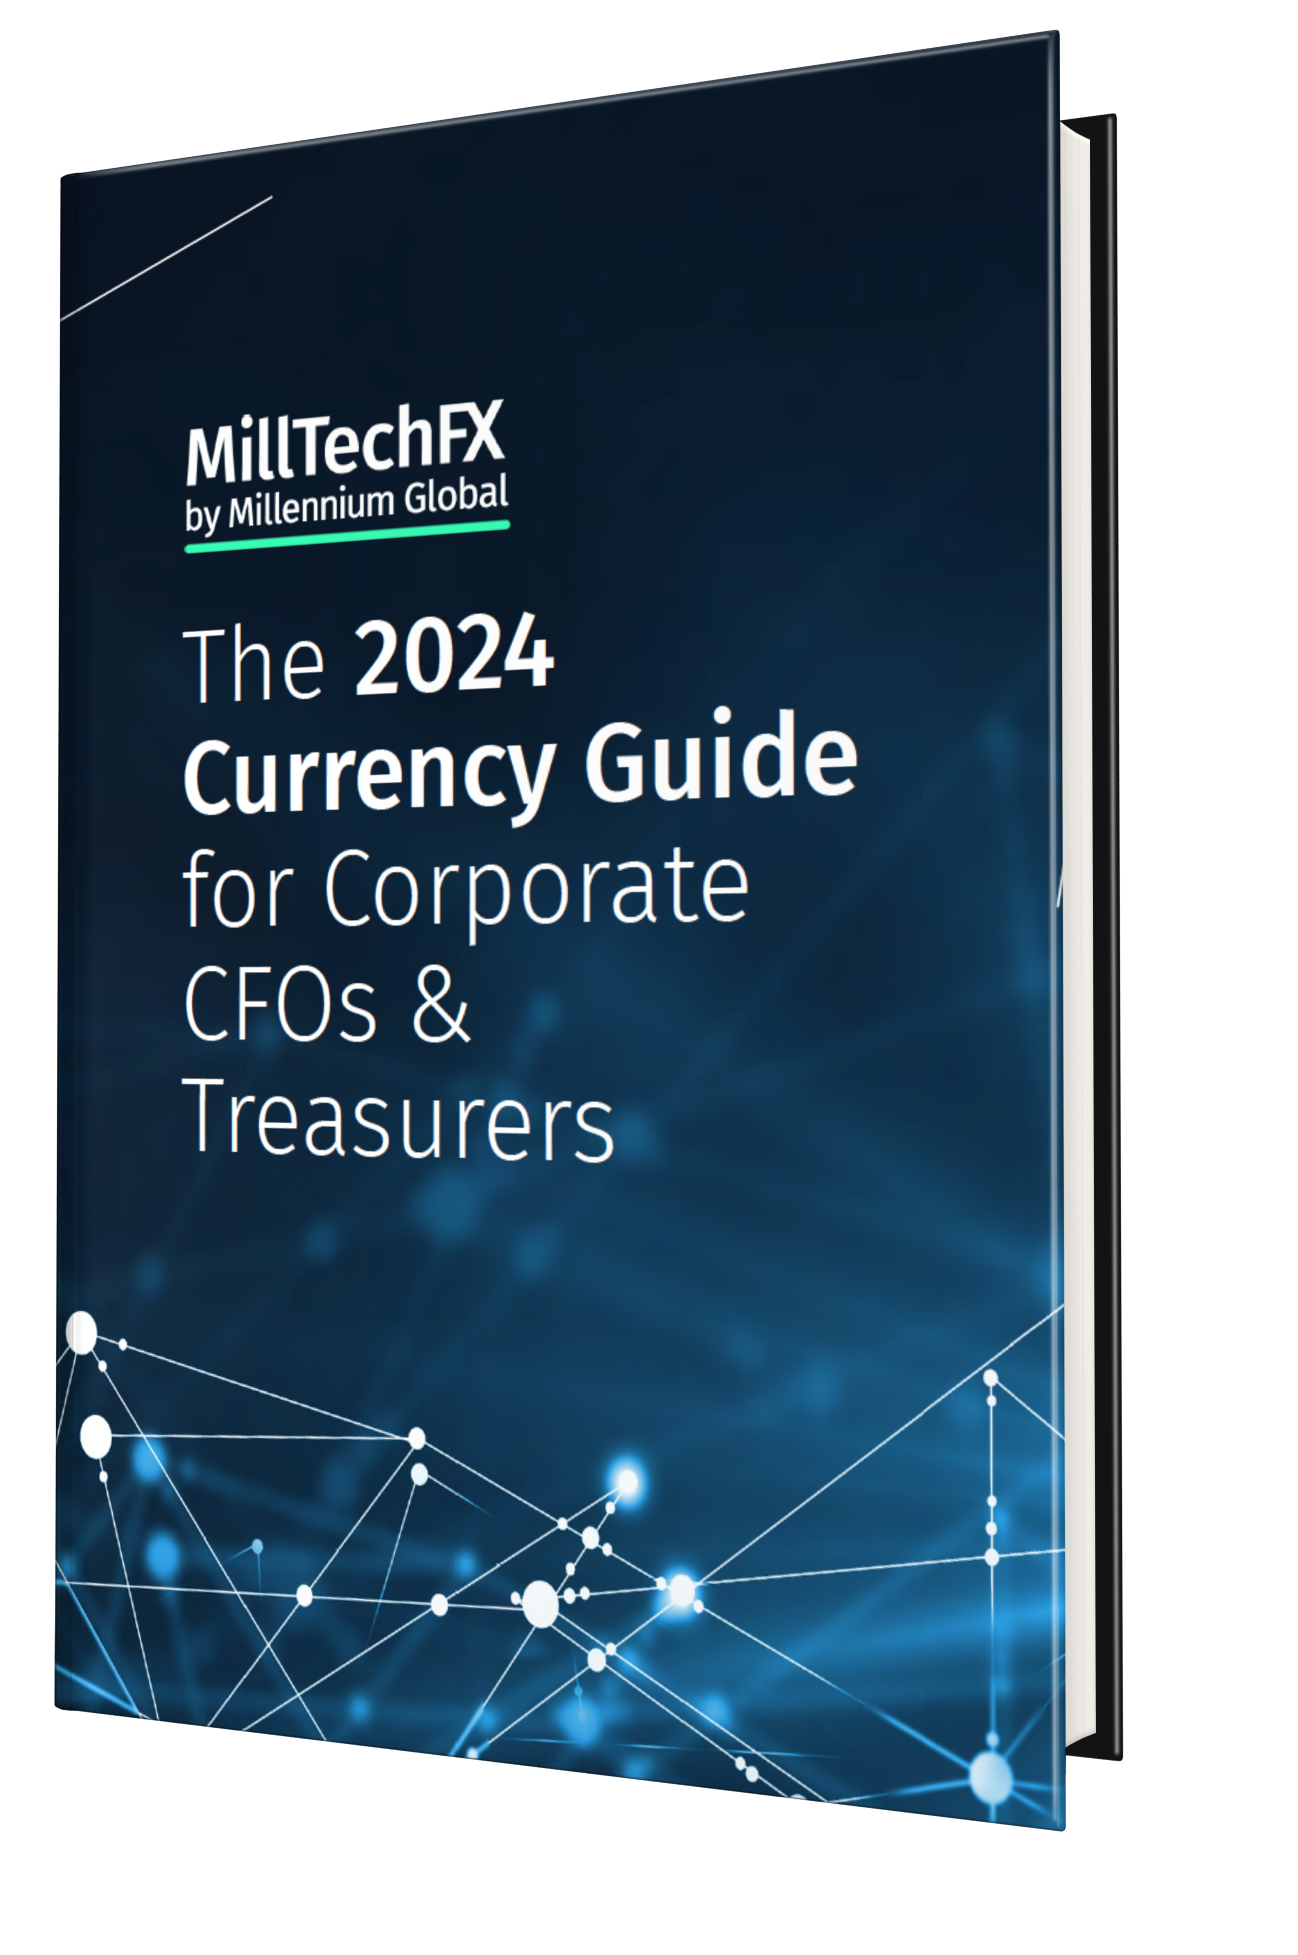 Cover No Bg The 2024 Currency Guide for Corporate Cf Os & Treasurers